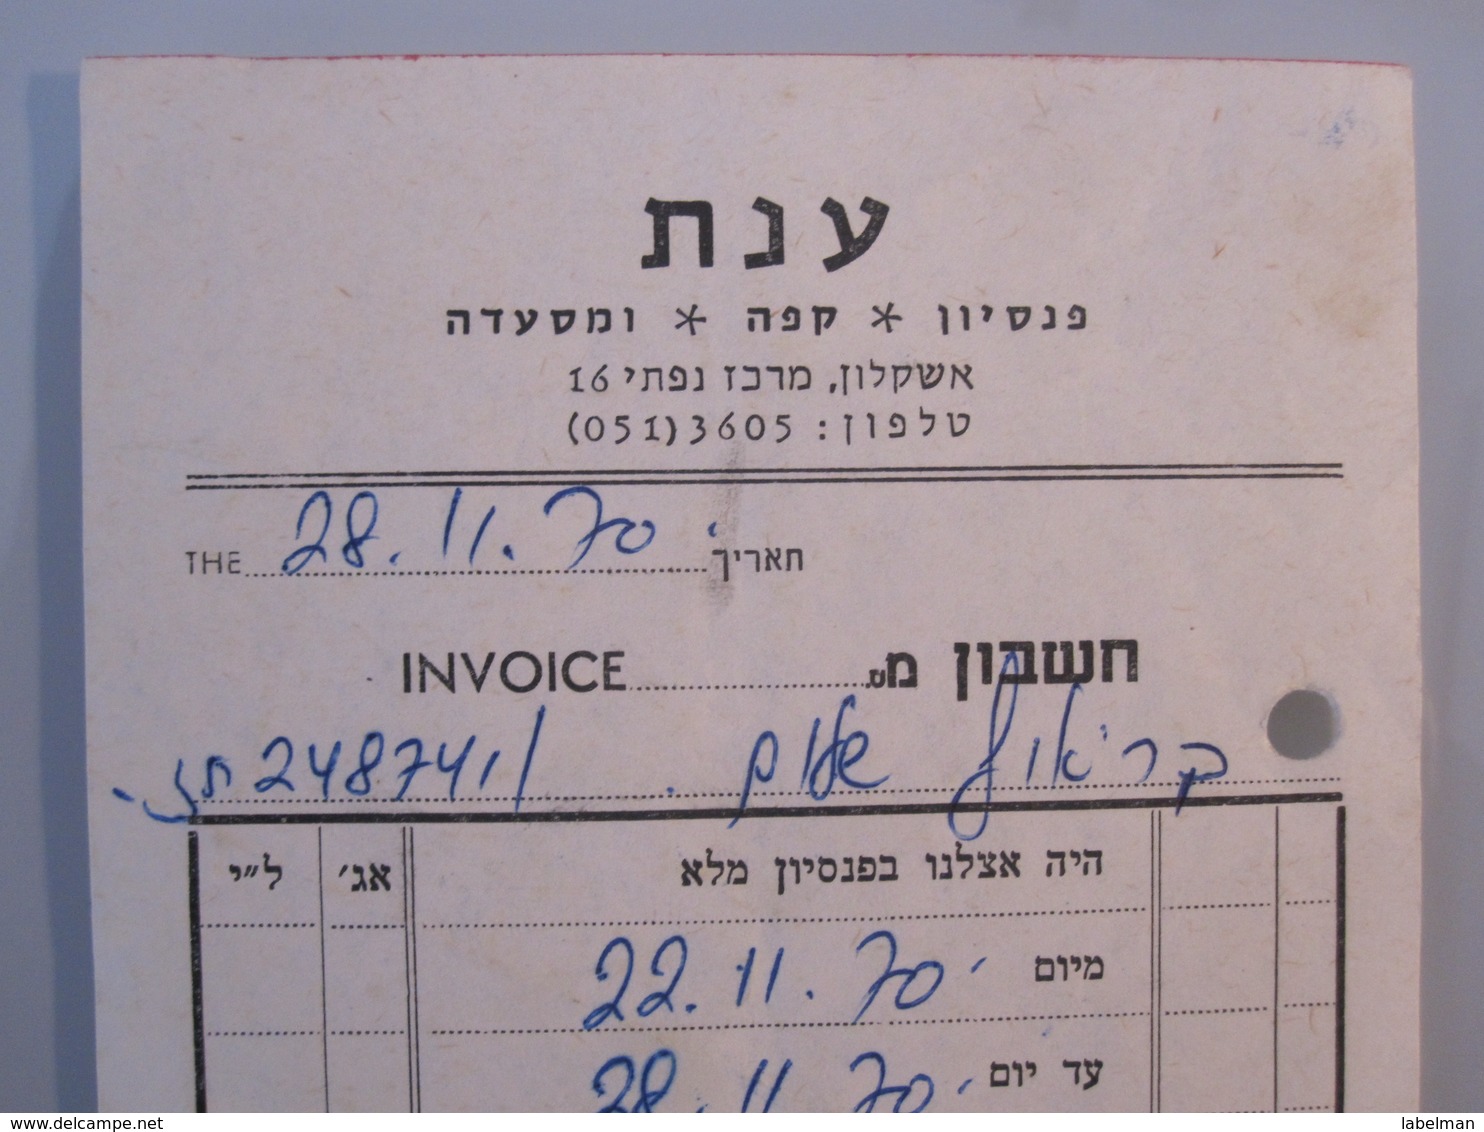 ISRAEL PALESTINE HOTEL PENSION REST GUEST INN HOUSE ANAT ASHKELON TAX STAMP BILL INVOICE VOUCHER - Hotel Labels